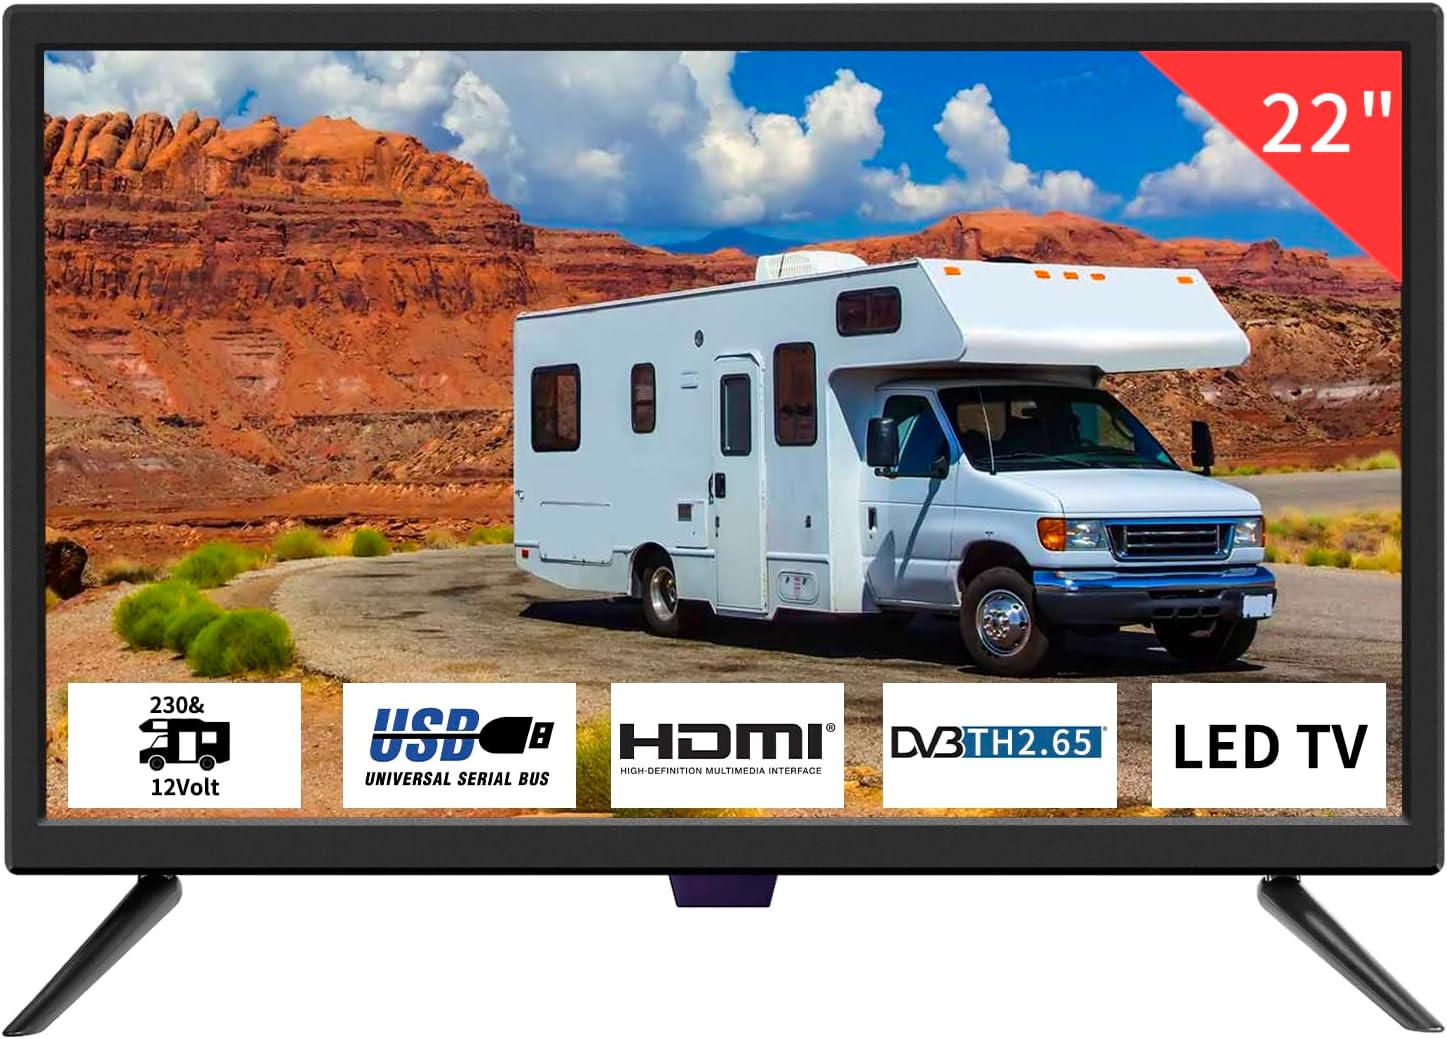 TV 22 inch IPS HD 1080P Screen,Small tv with Freeview Receiver,12 volt TV Built Digital T2 Tuner,USB,HDMI/RCA/VGA inputs,Suitable for Bedroom Caravan - Amazing Gadgets Outlet